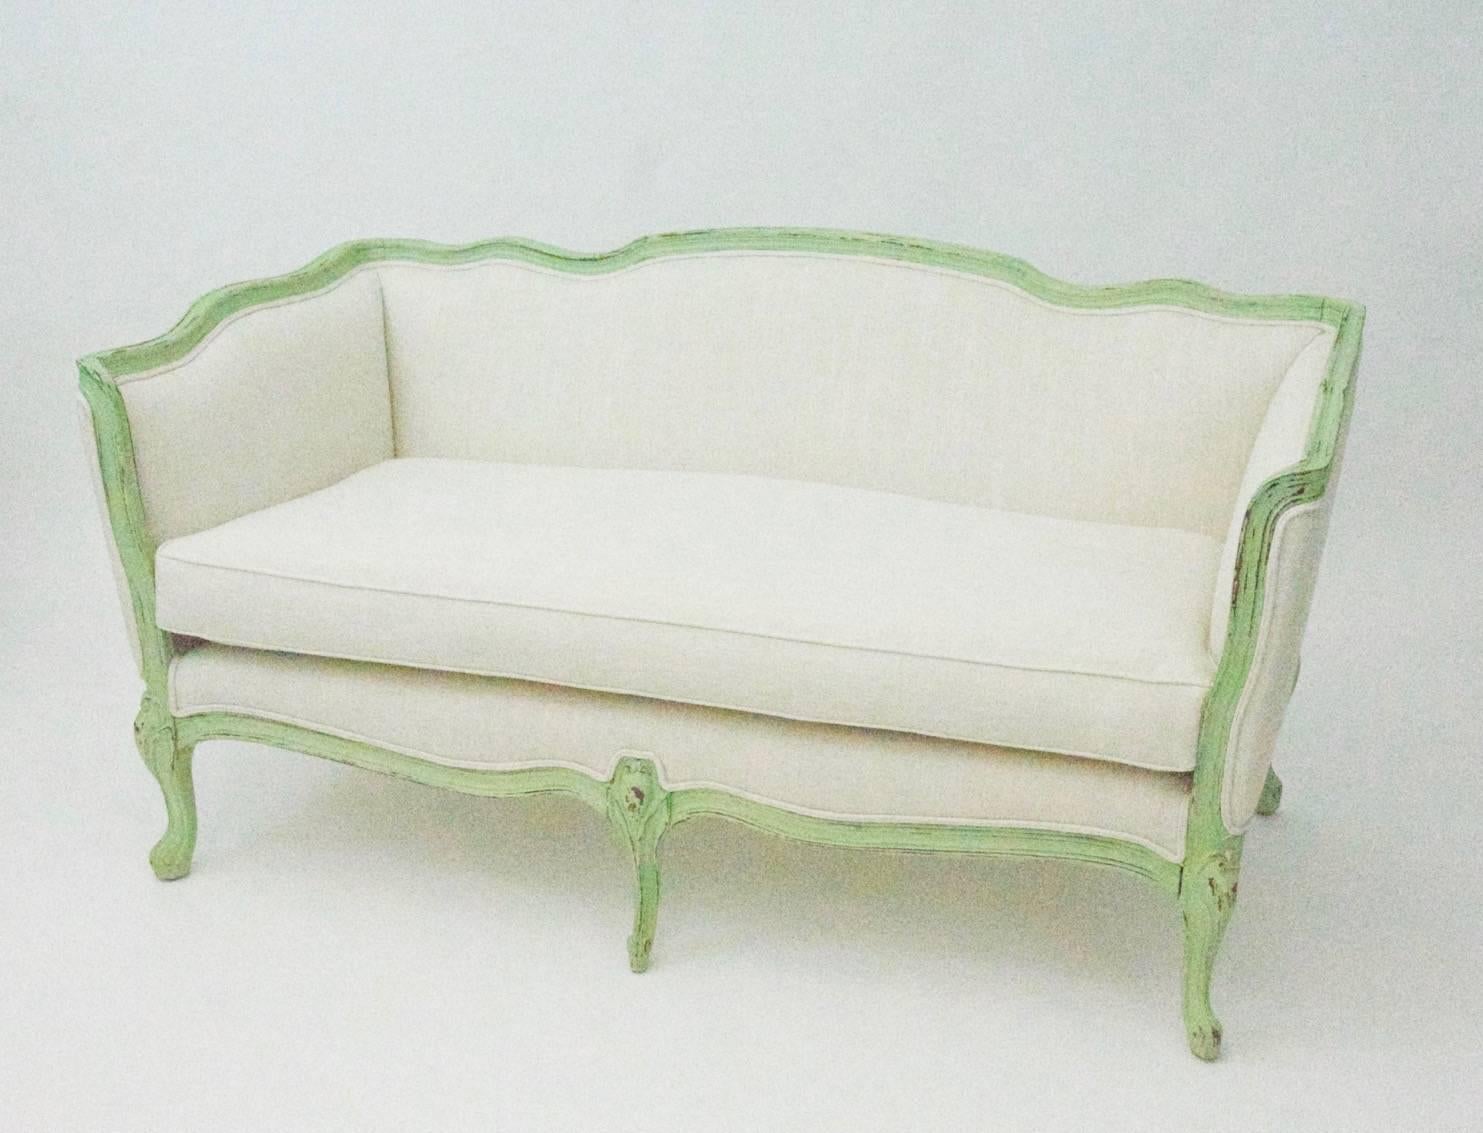 Vintage Country French style Settee upholstered in linen blend, featuring a bench cushion. Painted wood frame has a distressed, aged patina look.